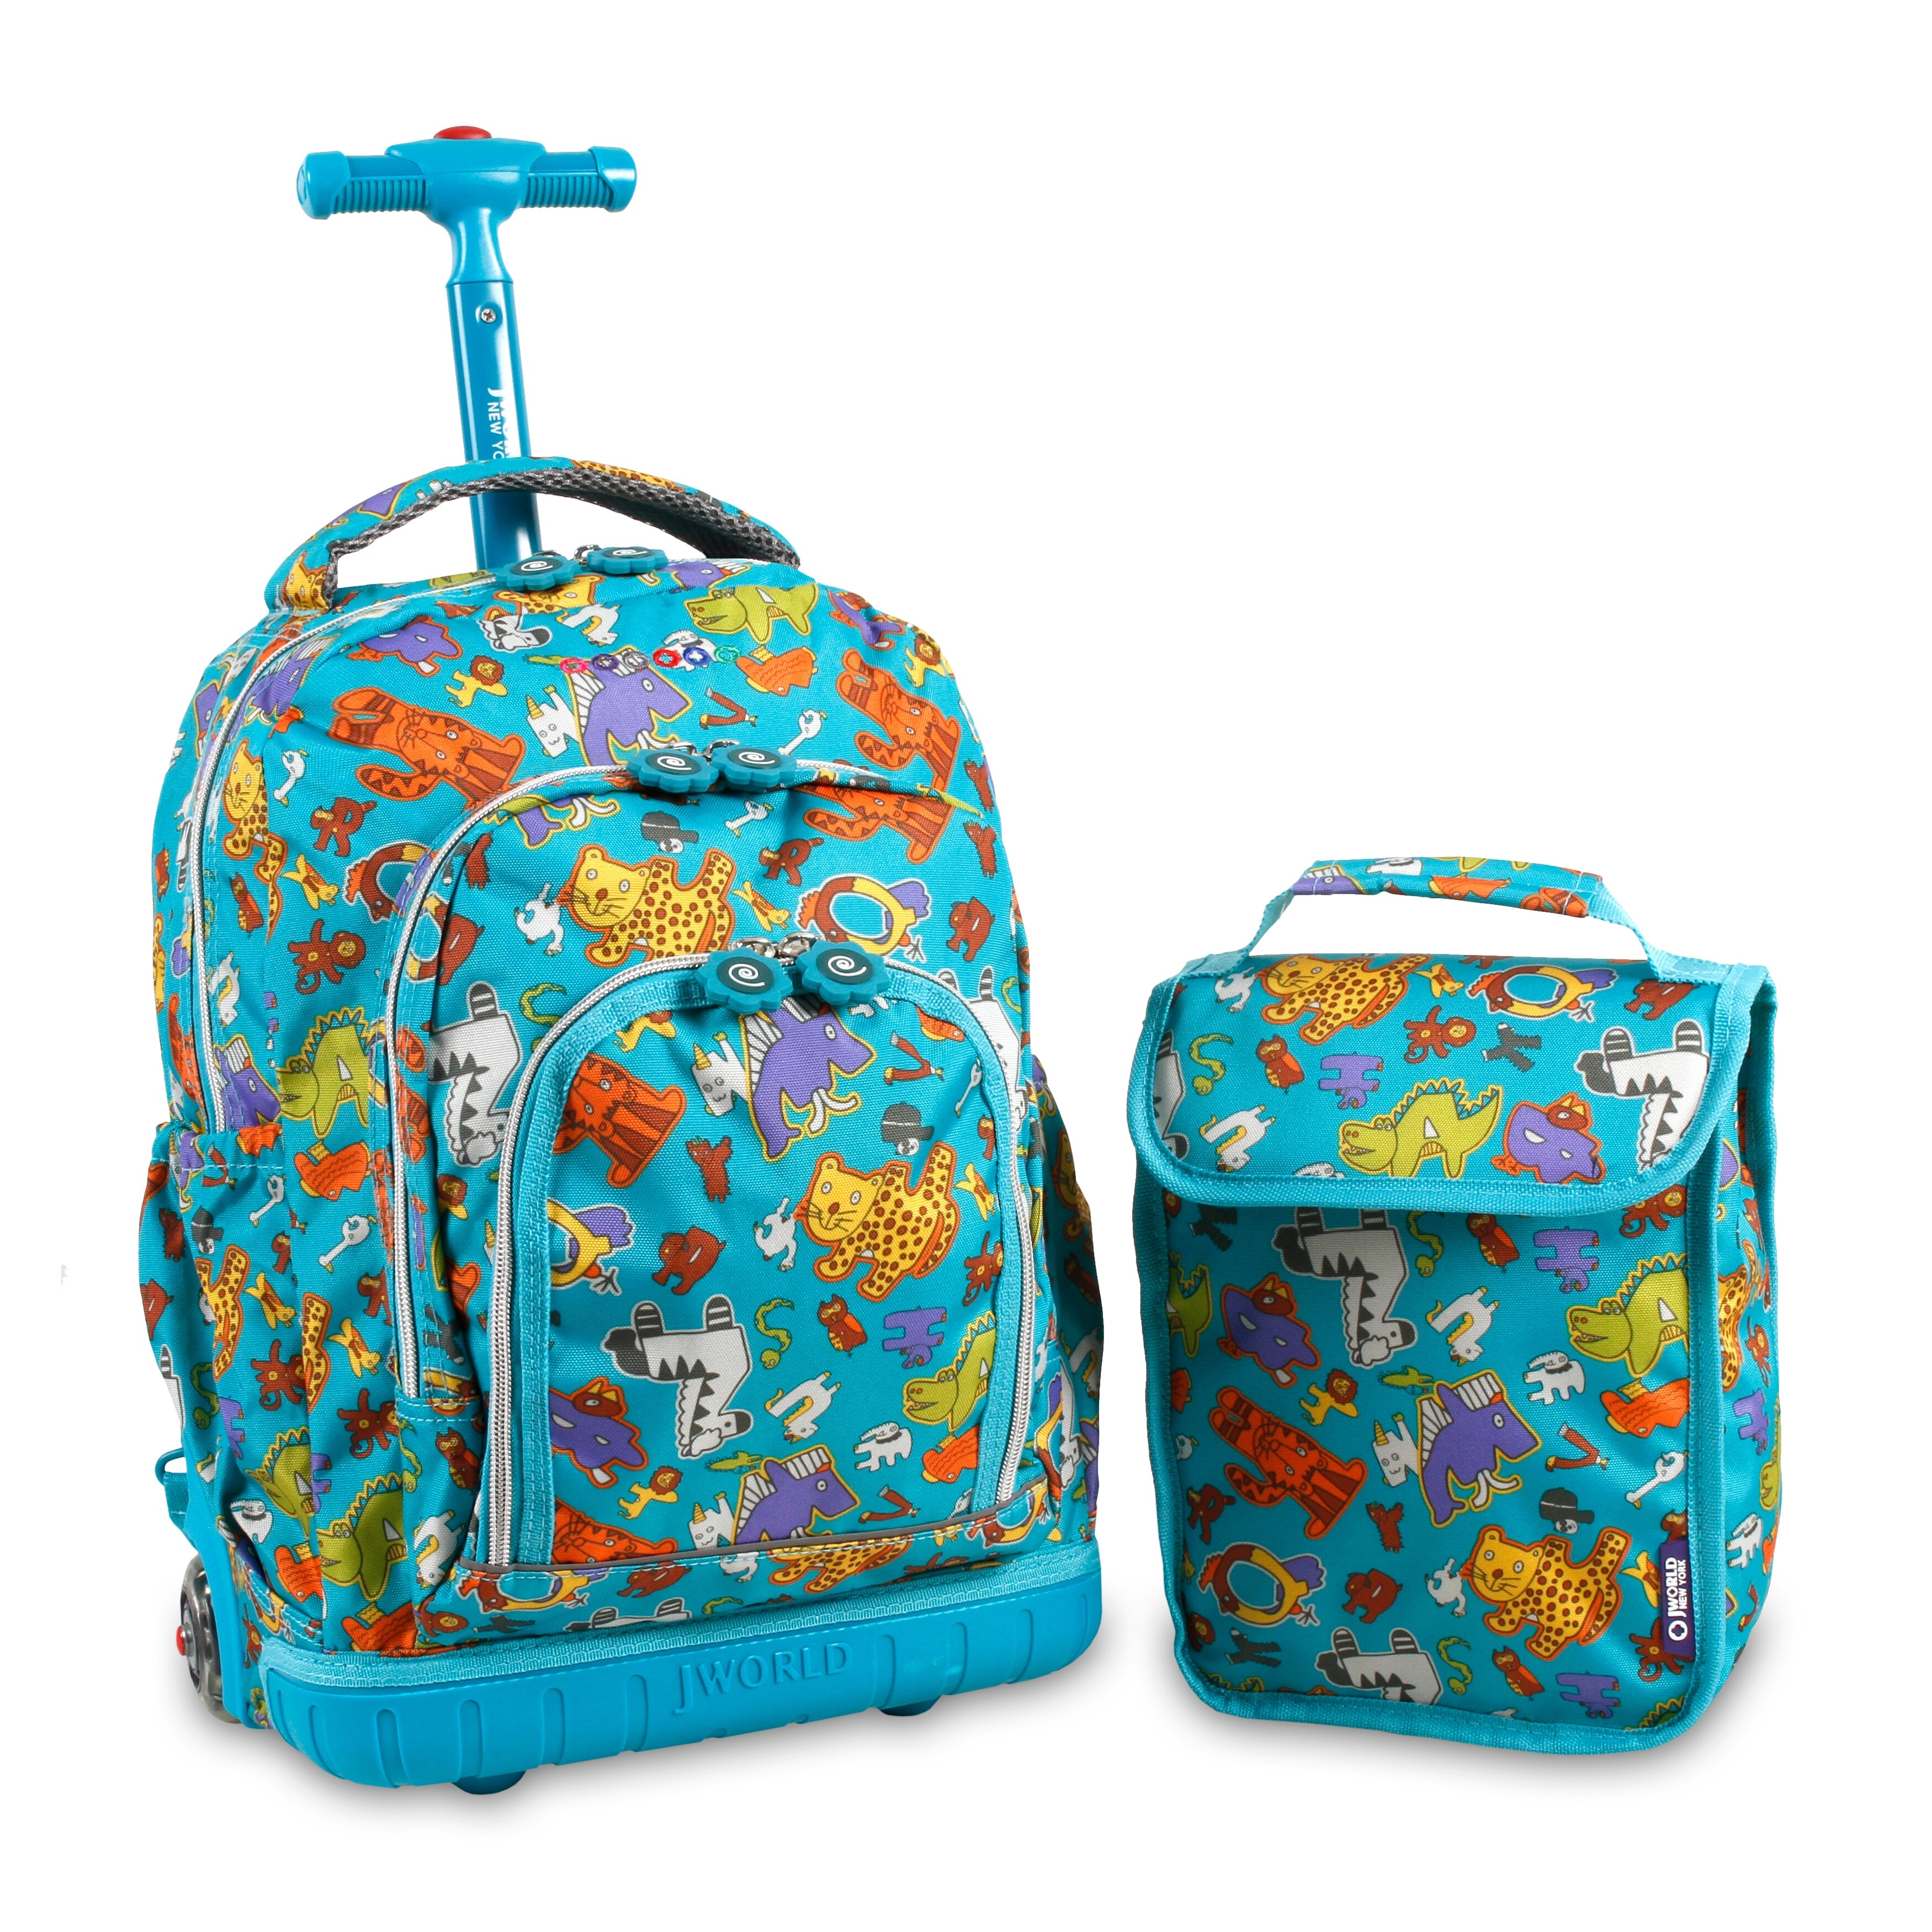 J World Lollipop Aniphabets Rolling Backpack and Lunch Bag Multi-color ...